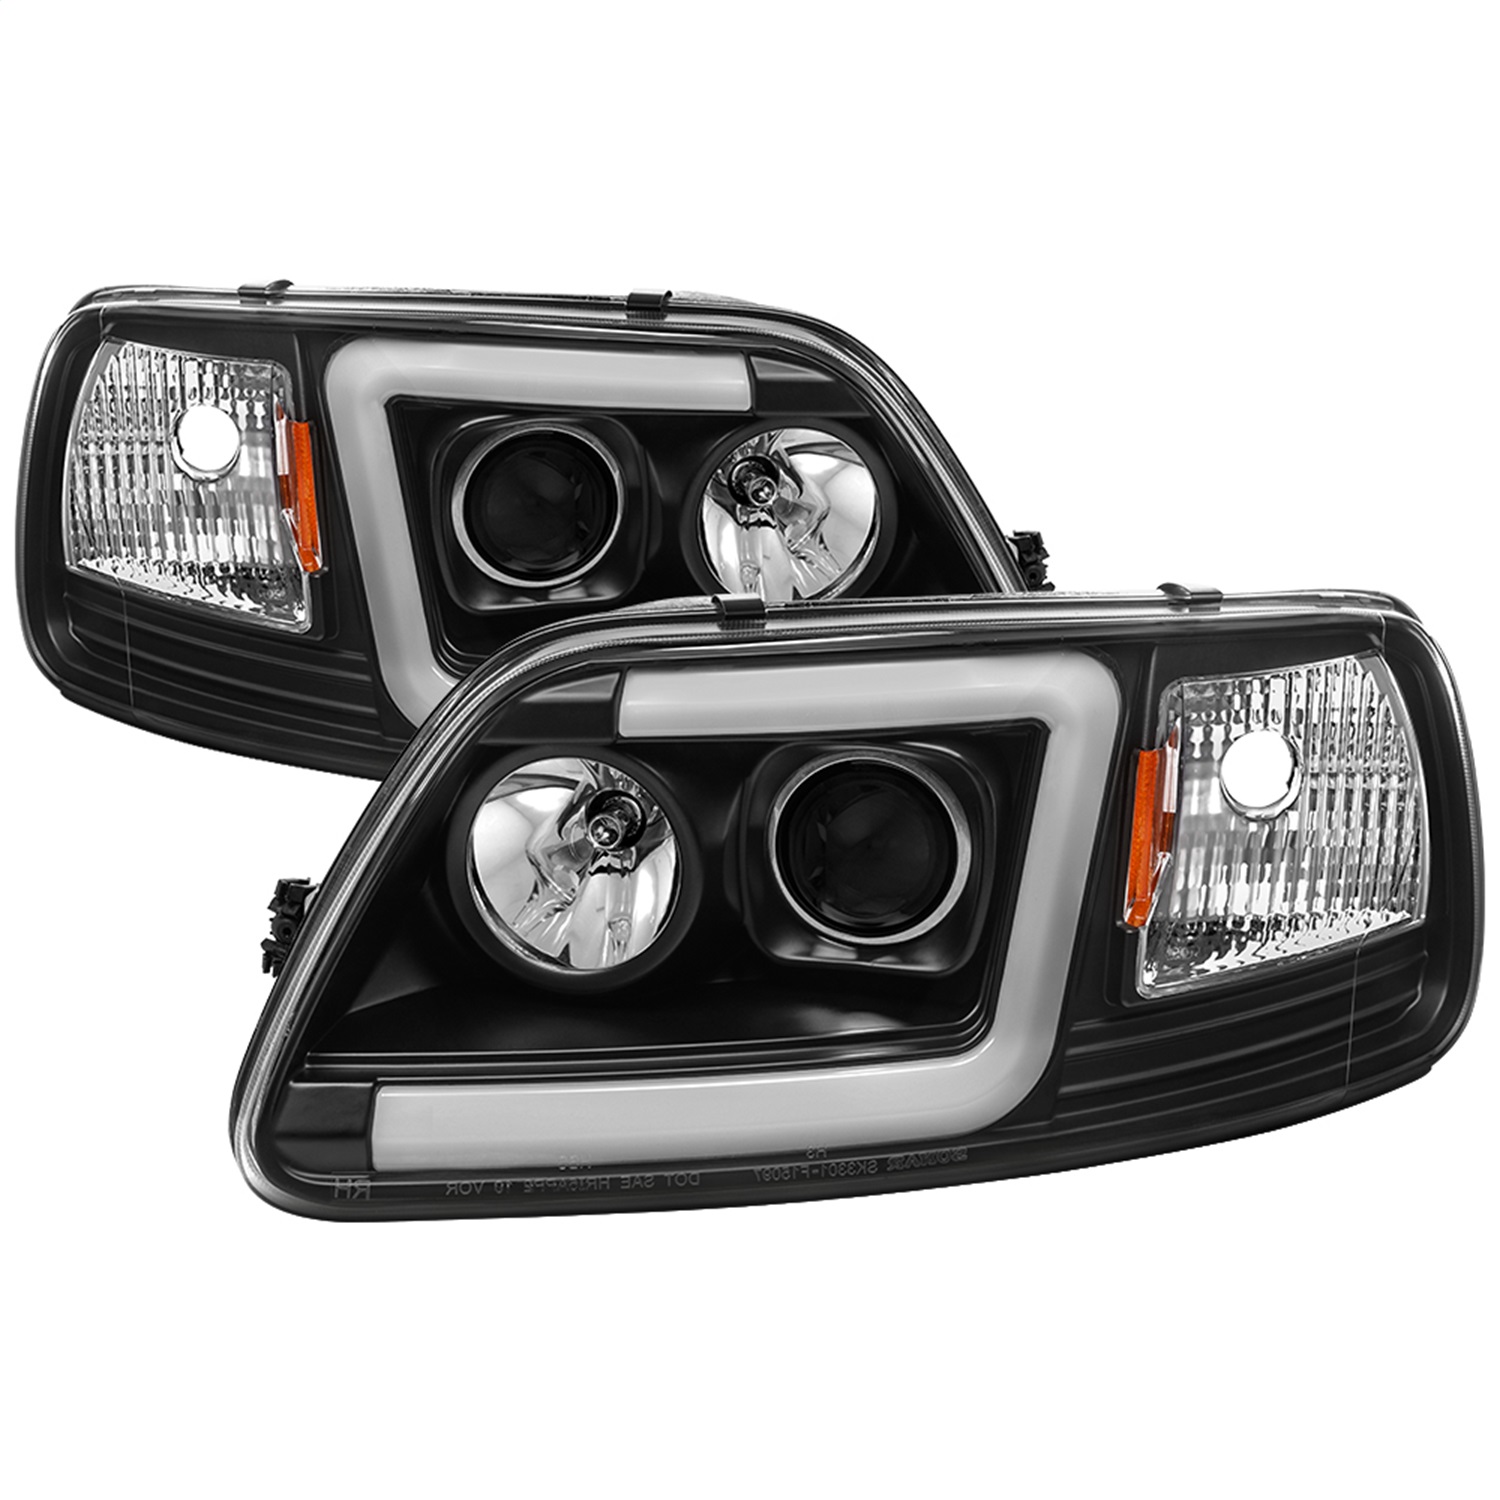 Spyder Auto 5084538 Projector Headlights Fits 97-03 Expedition F-150